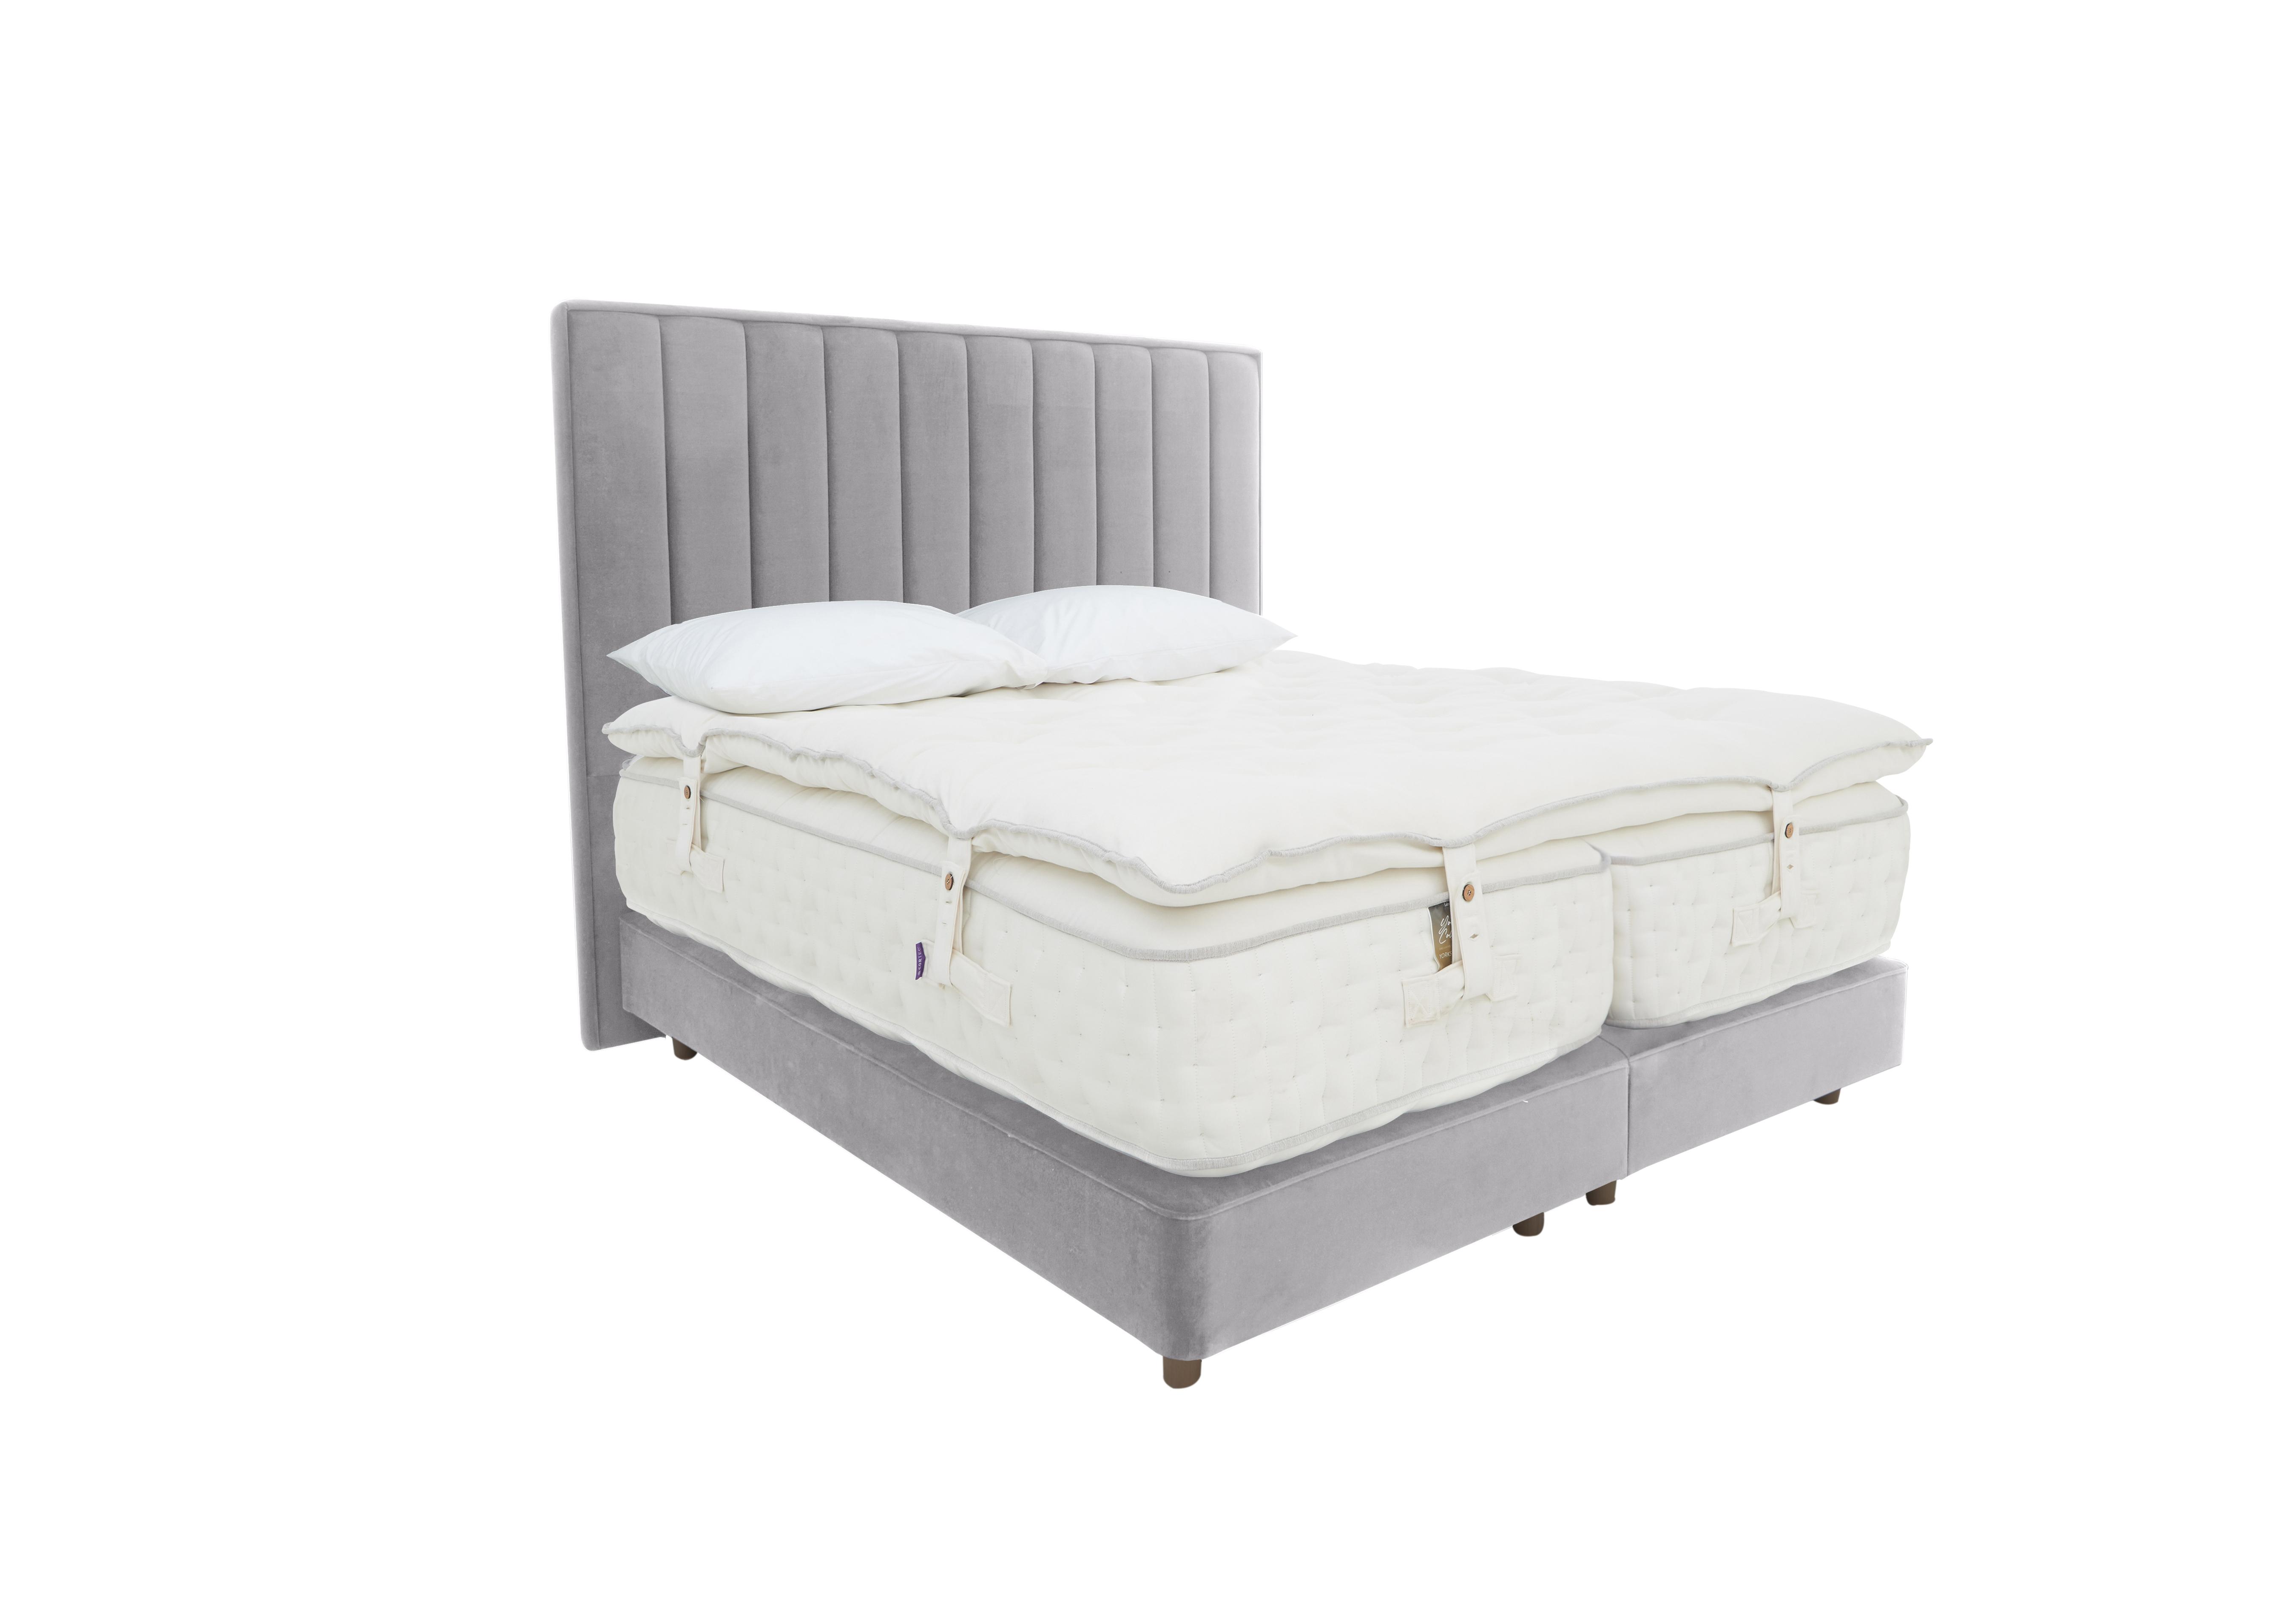 Yorkshire 40K Shallow Divan Set with Zip and Link Mattress with Mattress Topper in Seven Lilac on Furniture Village